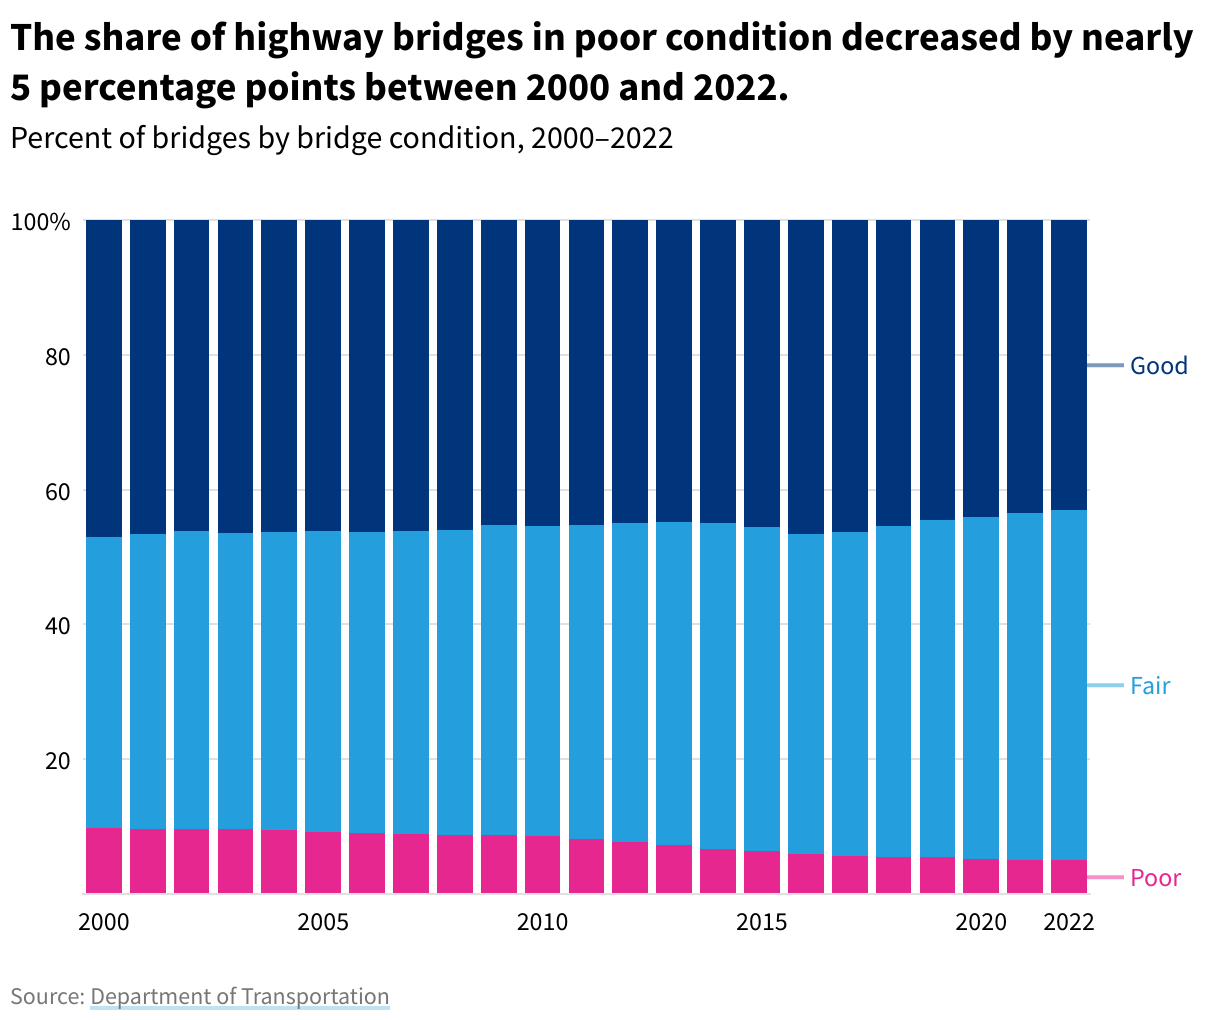 Stacked area chart showing the percent of bridges in Poor, Fair, and Good condition between 200 and 2022. Bridges in Good conditions decreased from 47% in 2000 to 43% in 2022. Bridges in Fair condition increased from 43% in 2000 to 52% in 2022. Bridges in Poor condition decreased from 10% in 2000 to 5% in 2022.